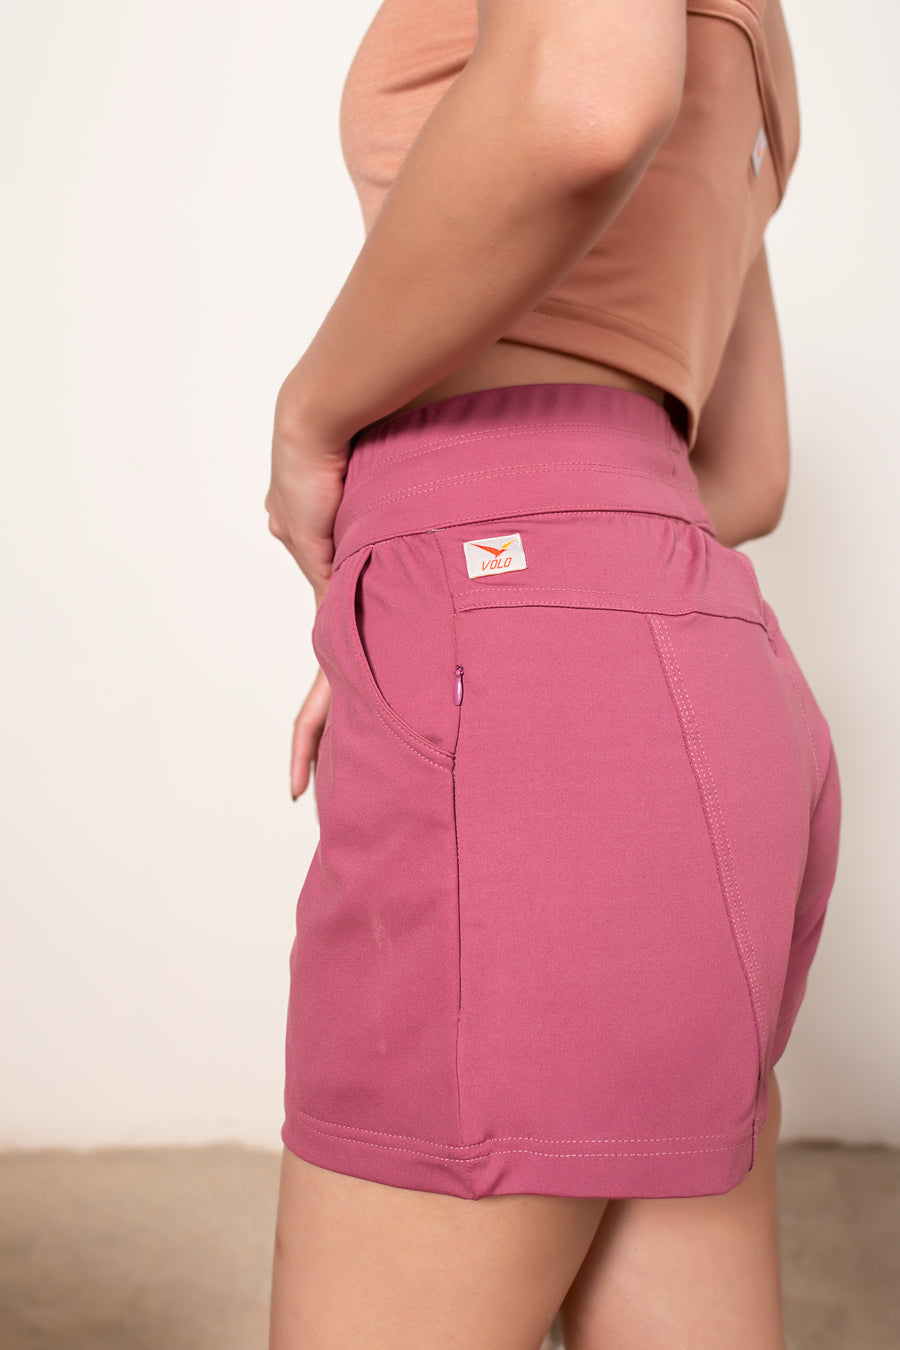 Women's Terra Shorts Garnet Pink | VOLO Apparel | A blend of technology, function, and style. The Terra shorts are designed and ready for every active opportunity that comes your way. Your first women's shorts with deep pockets, a snap button smart phone pocket, a zippered key pocket, and a hidden zippered back pocket.  High waisted, great for climbing, yoga, training, running and chilling.